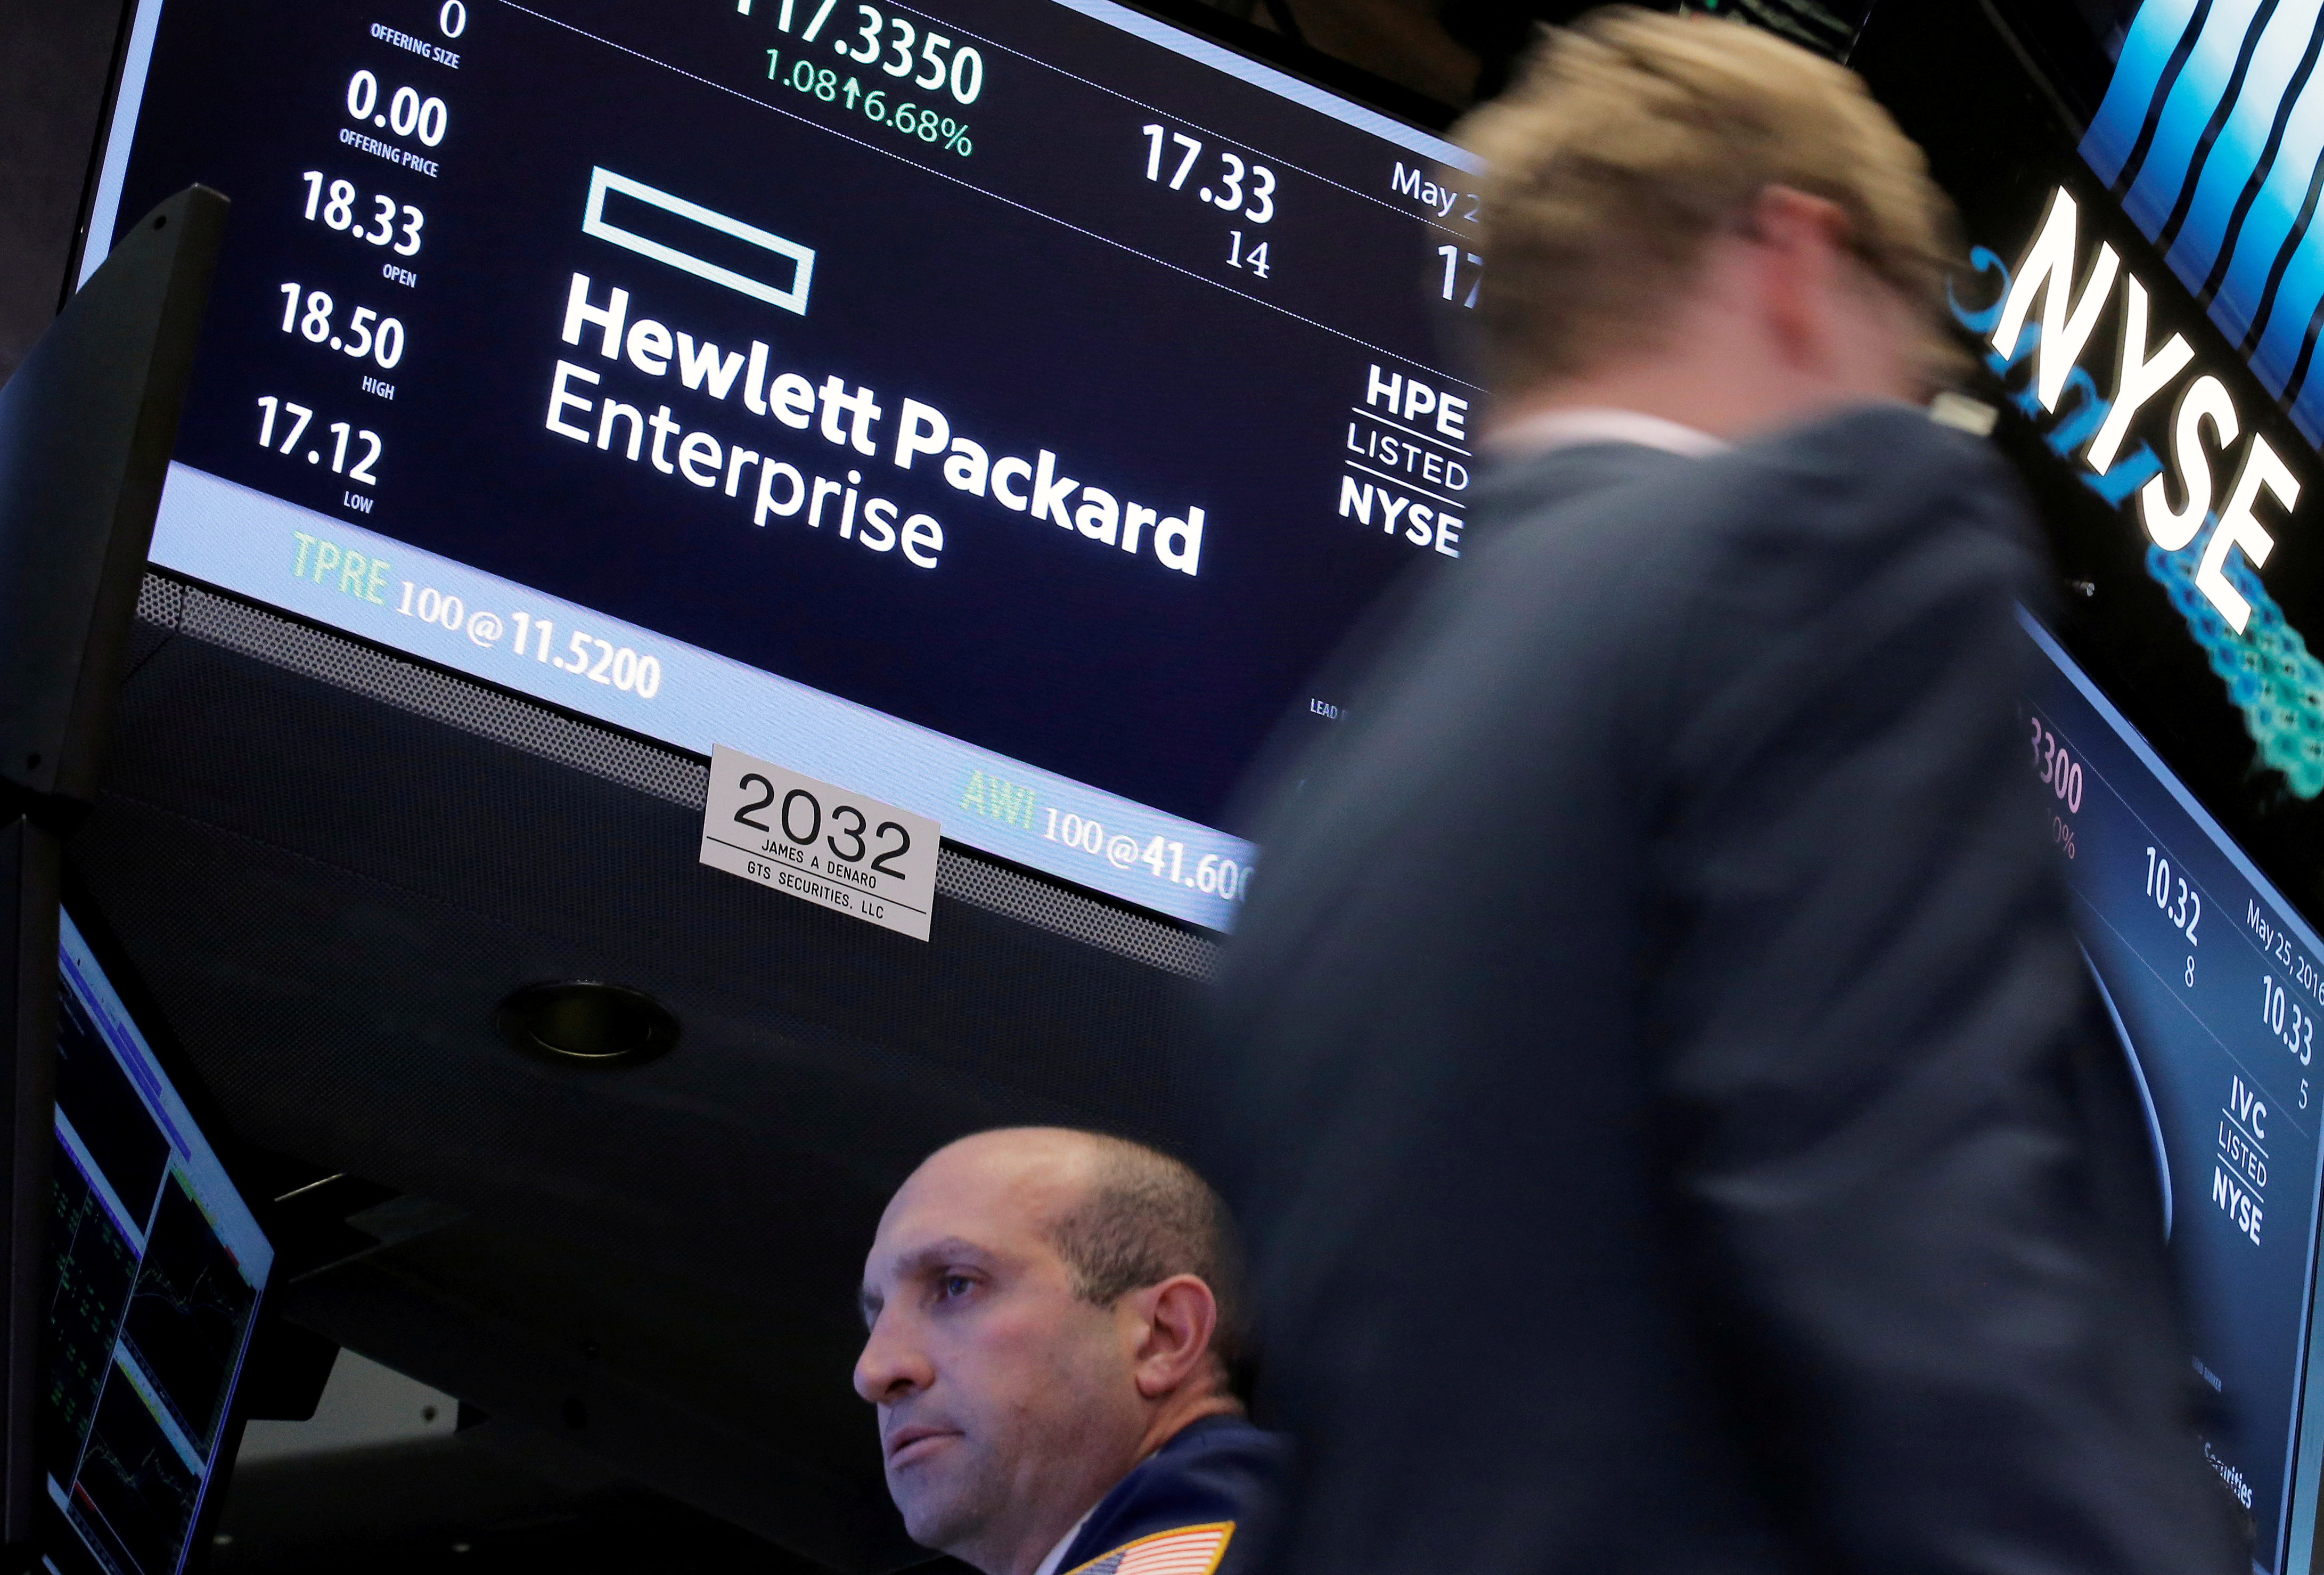 tFILE PHOTO: A trader passes by the post where Hewlett Packard Enterprise Co., is traded on the floor of the New York Stock Exchange